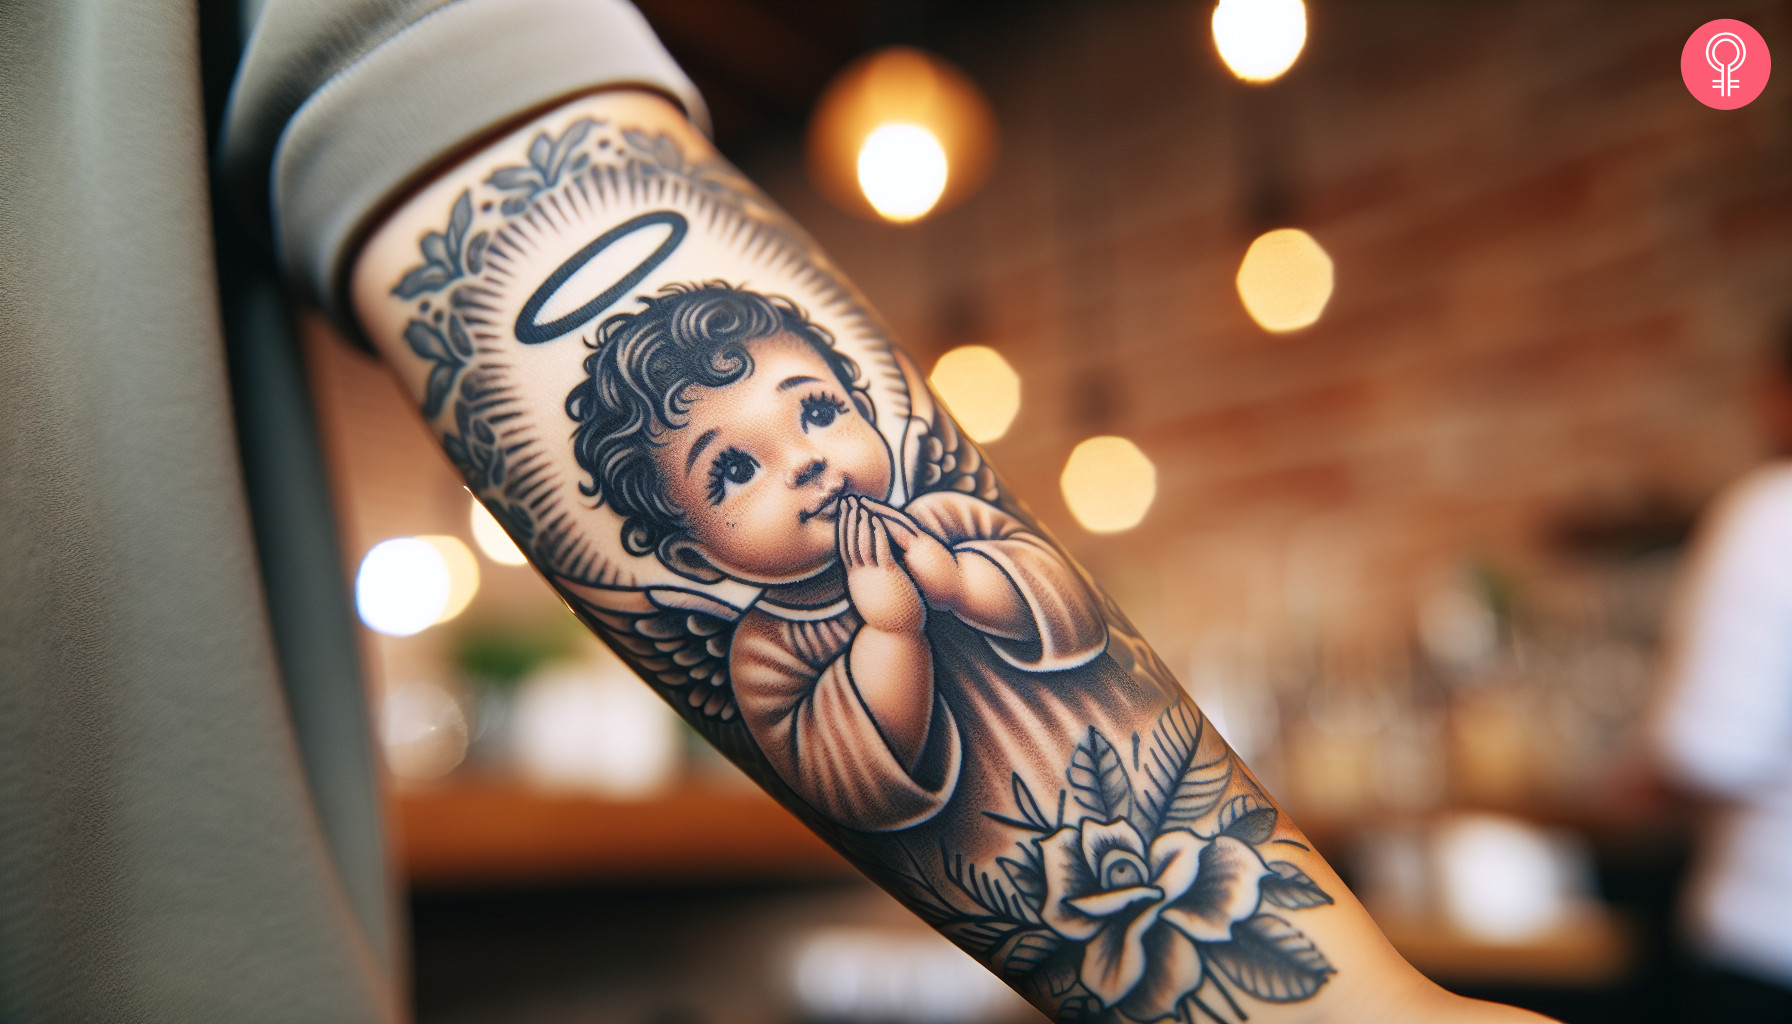 A praying baby angel tattoo on the forearm of a woman